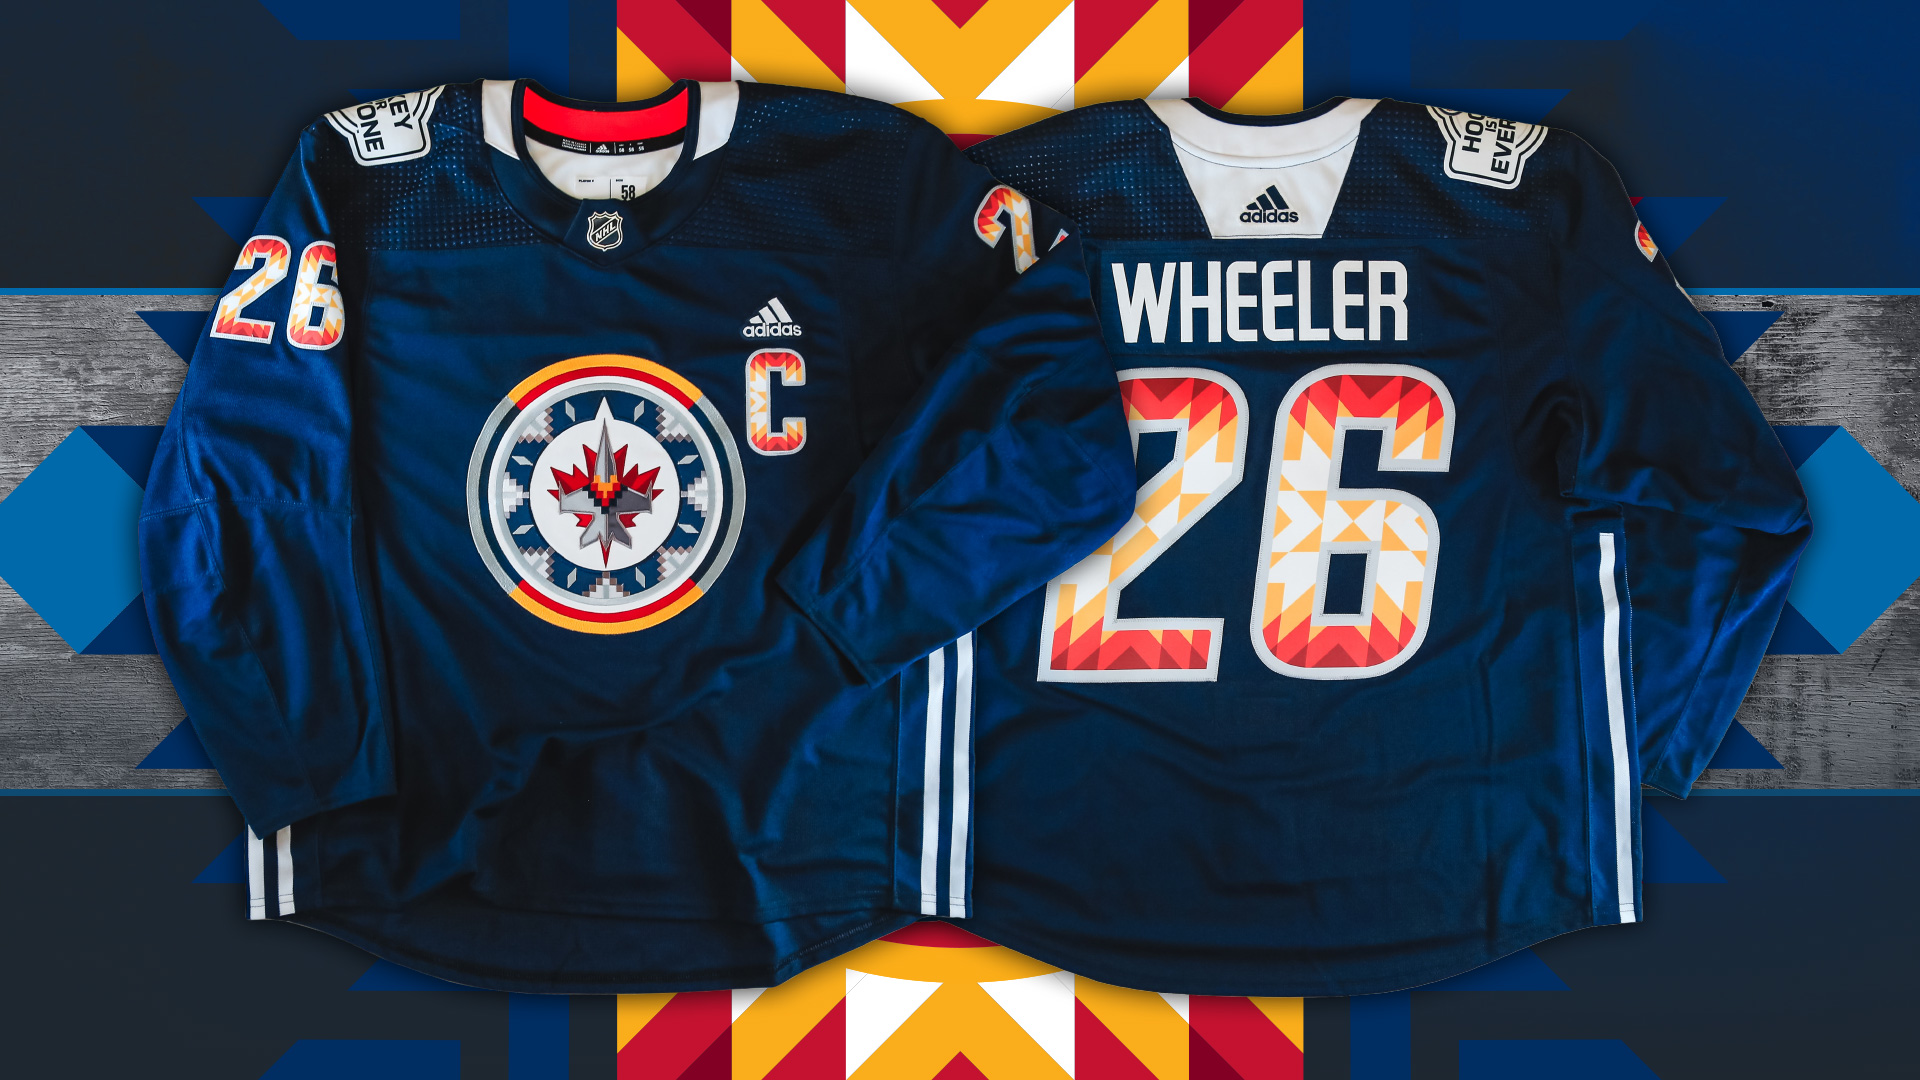 Winnipeg Jets on X: @ManitobaMoose #NHLJets will wear the WASAC jersey  during warm-up on January 17th and @ManitobaMoose will wear their Follow  Your Dreams jersey for the entire game on January 18th.